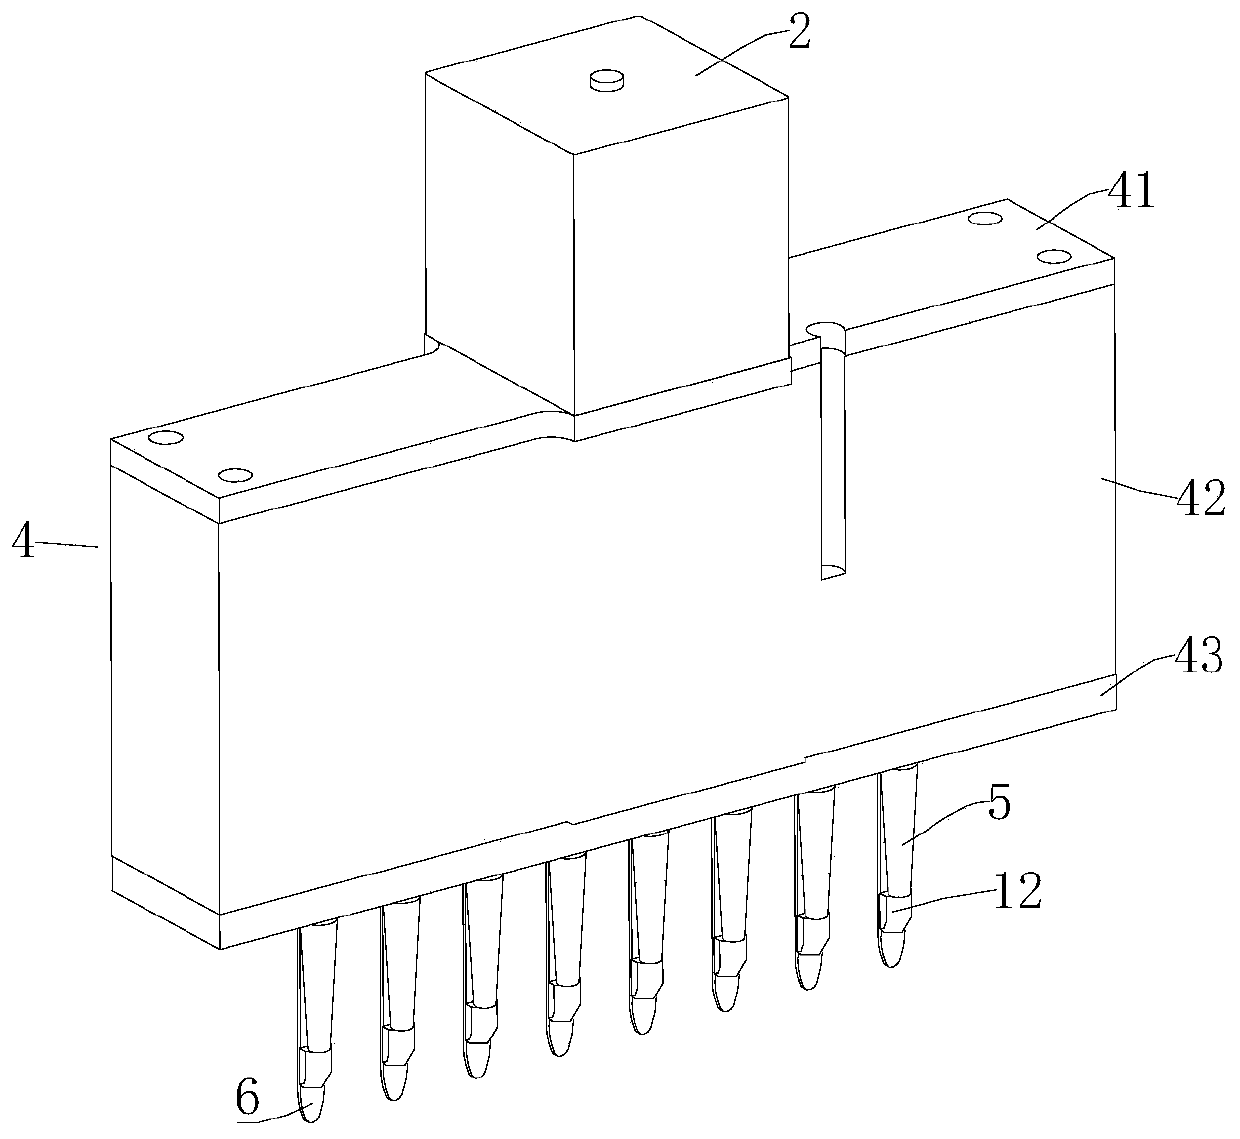 Auxiliary device for moving larvae